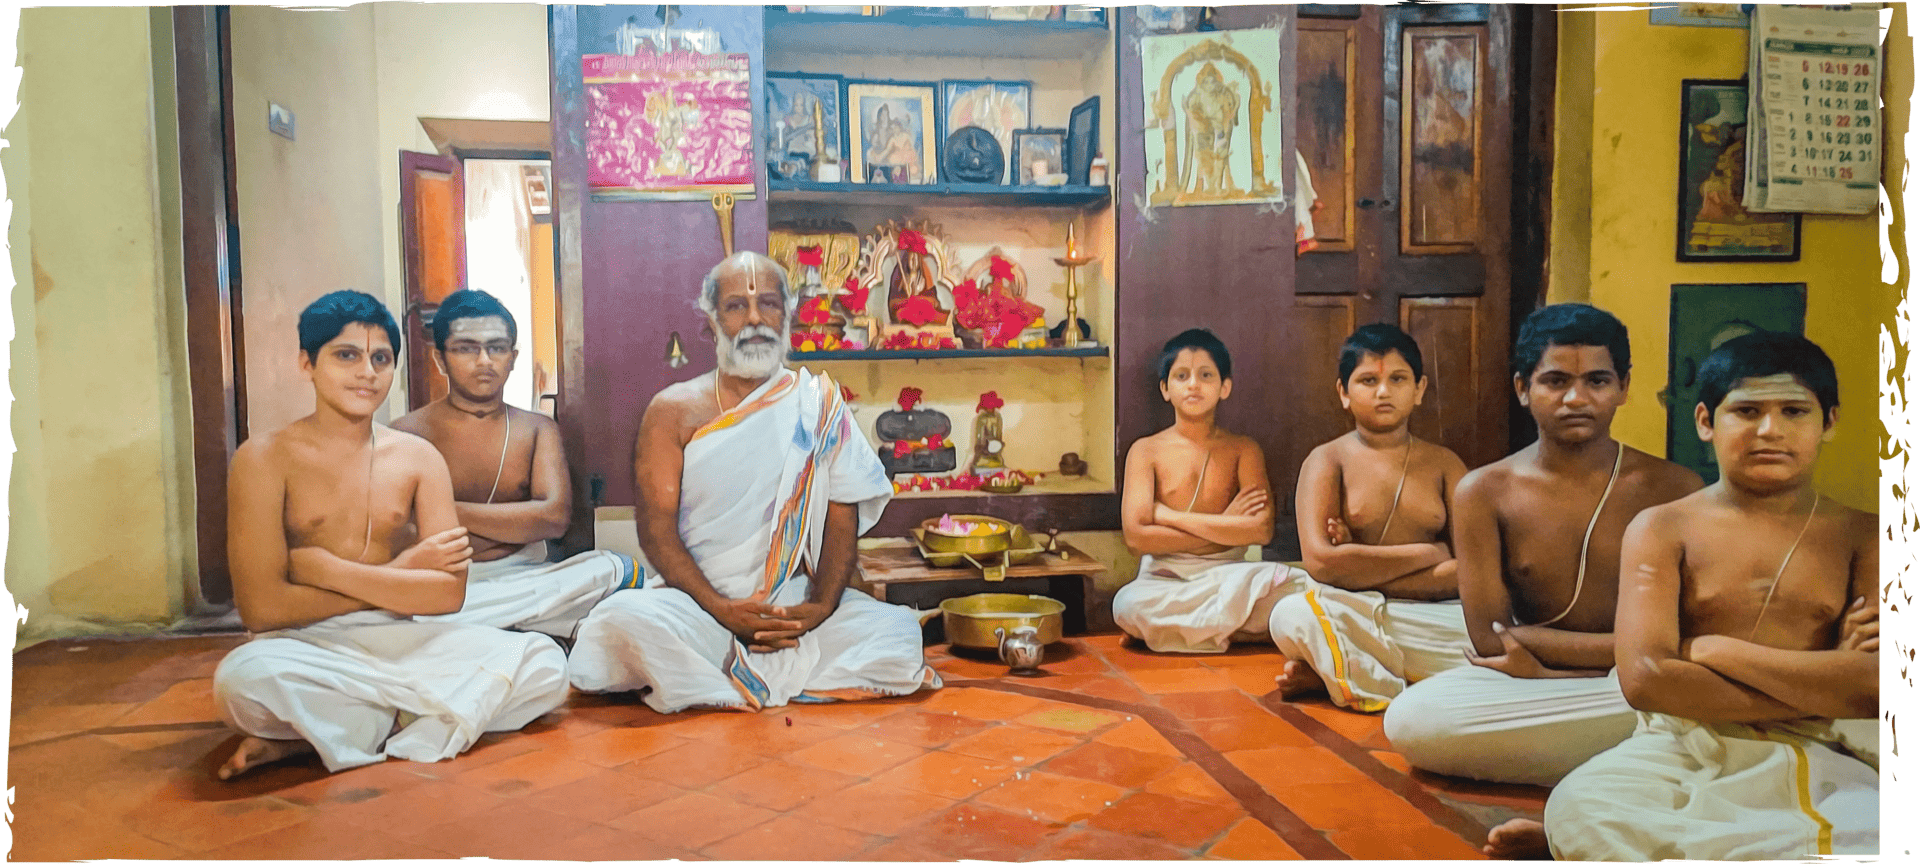 Image of Vedic students with their guru in a Pooja room.